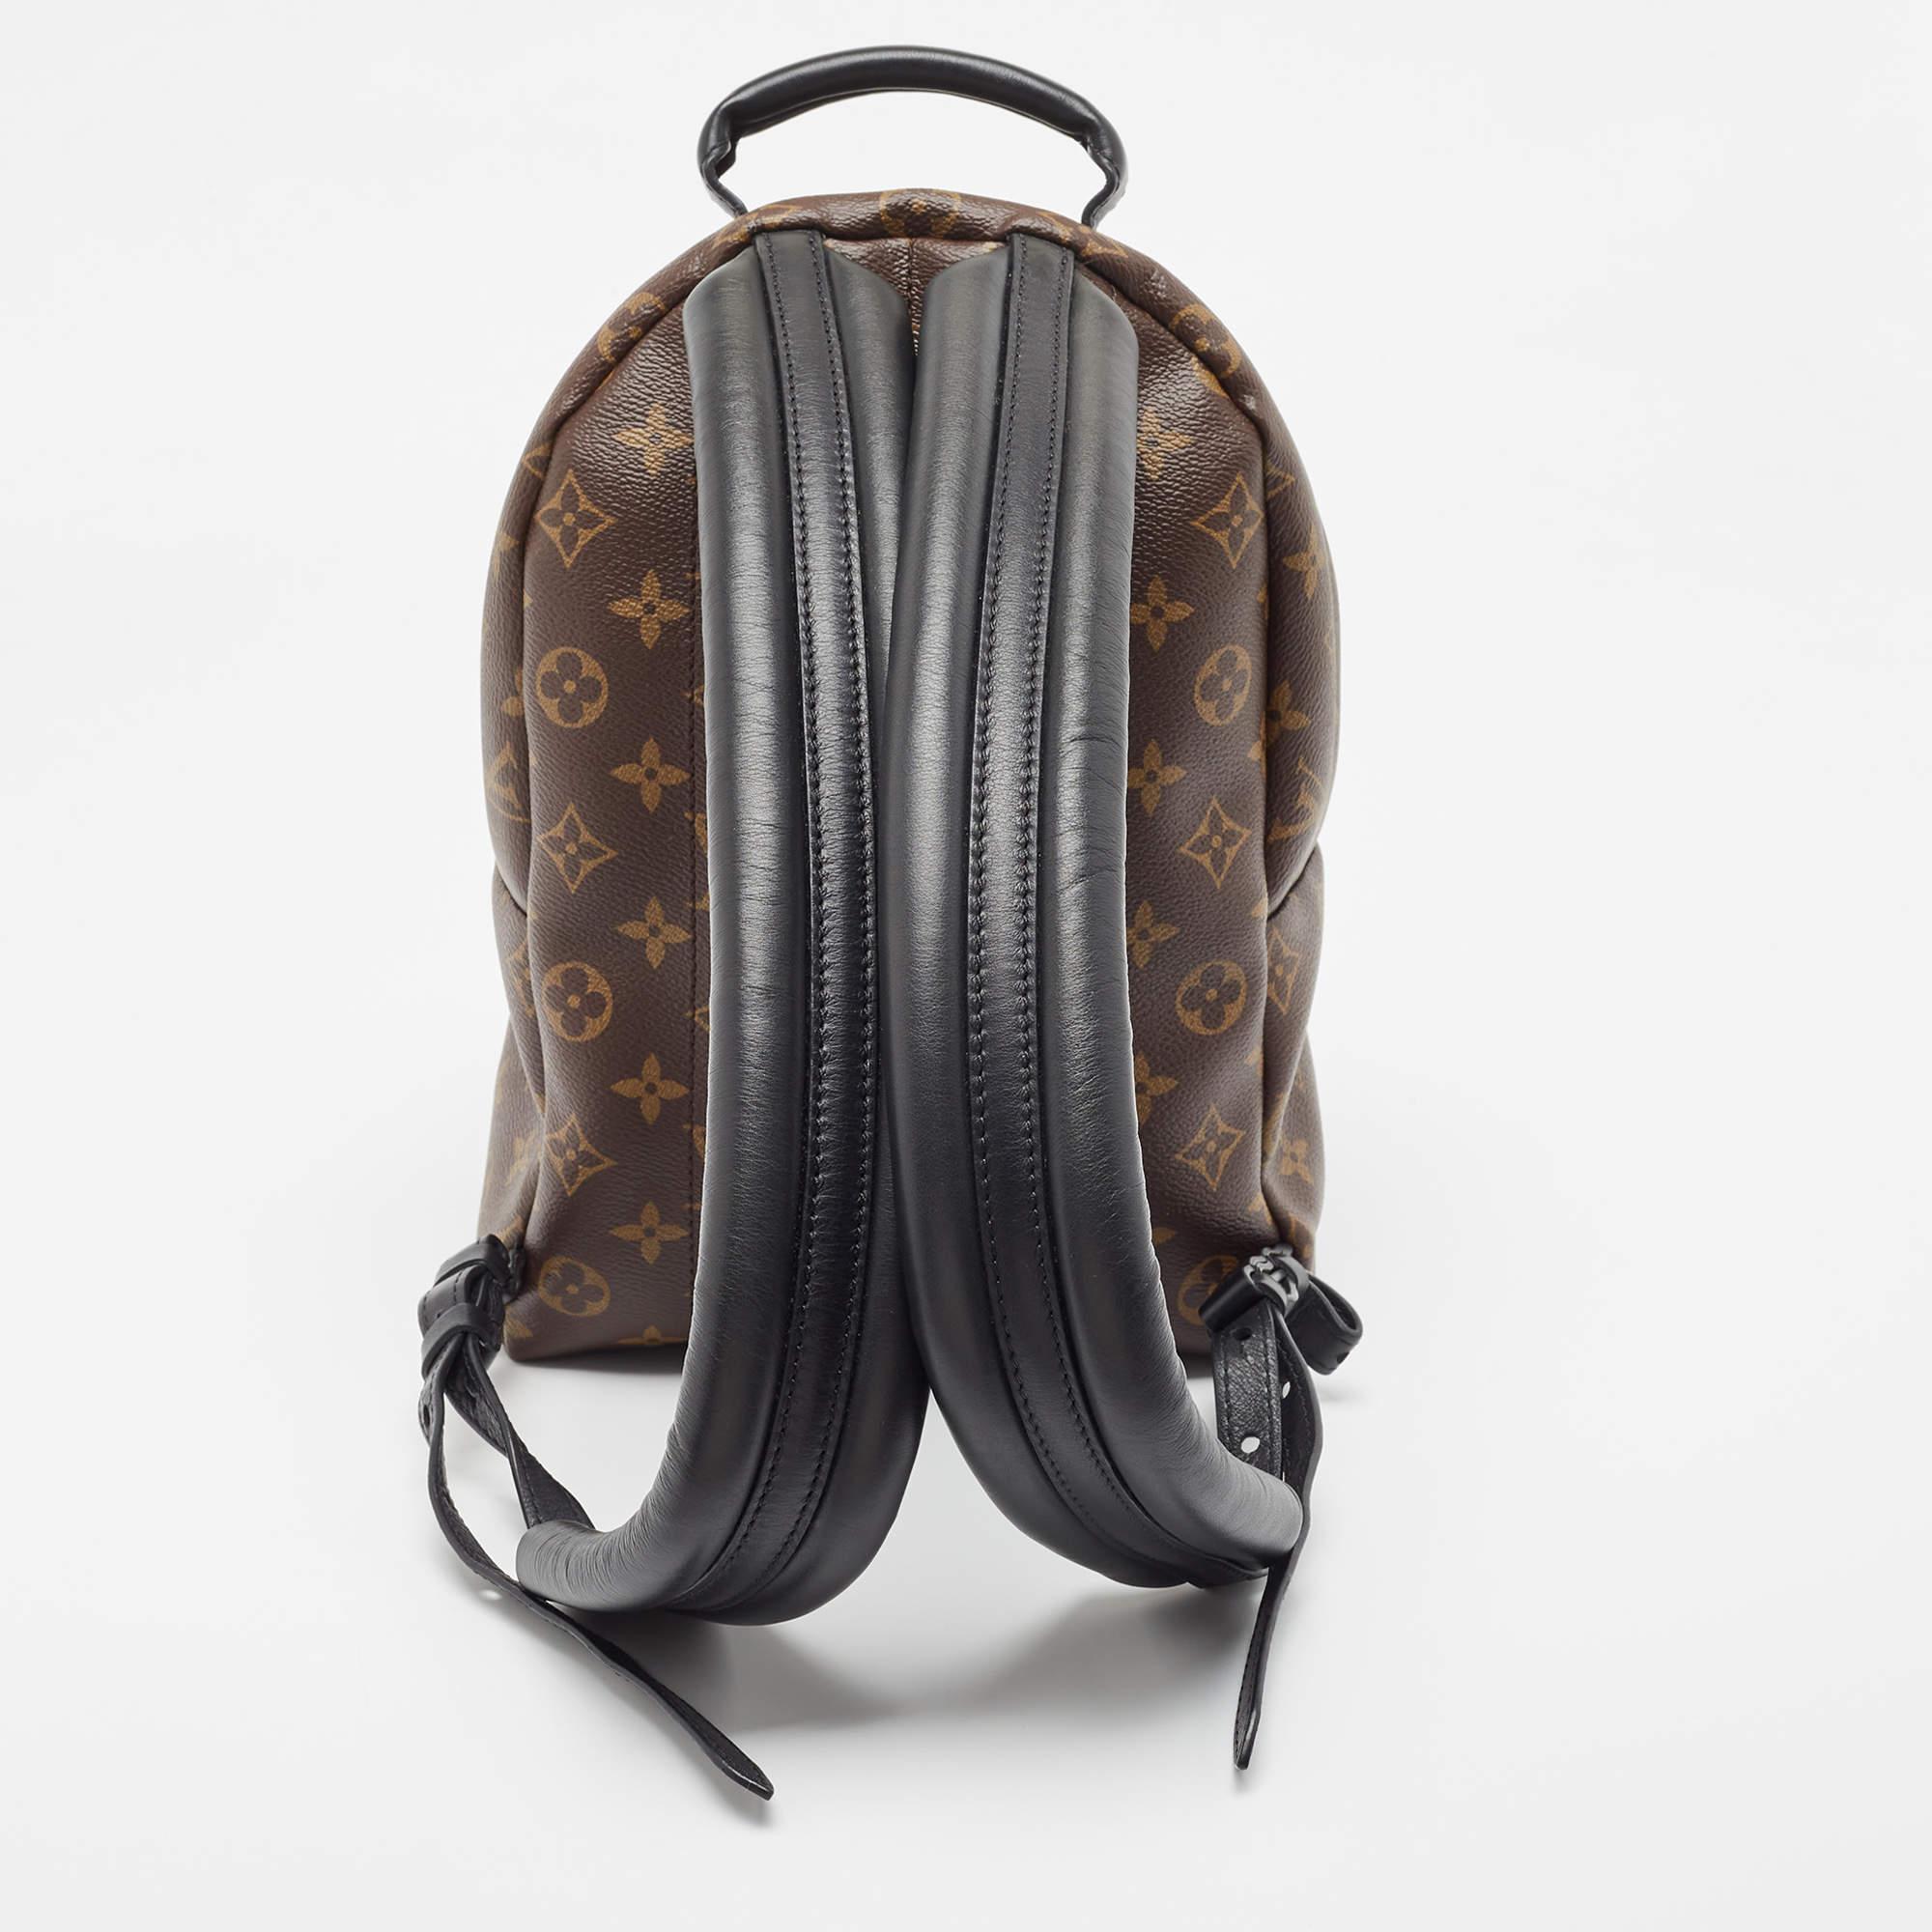 The Palm Springs gives a stylish twist to the backpack, transforming a practical staple into an on-point city bag. This charming creation is crafted from monogram canvas, leather, and gold-tone hardware. The padded shoulder straps allow easy wear.